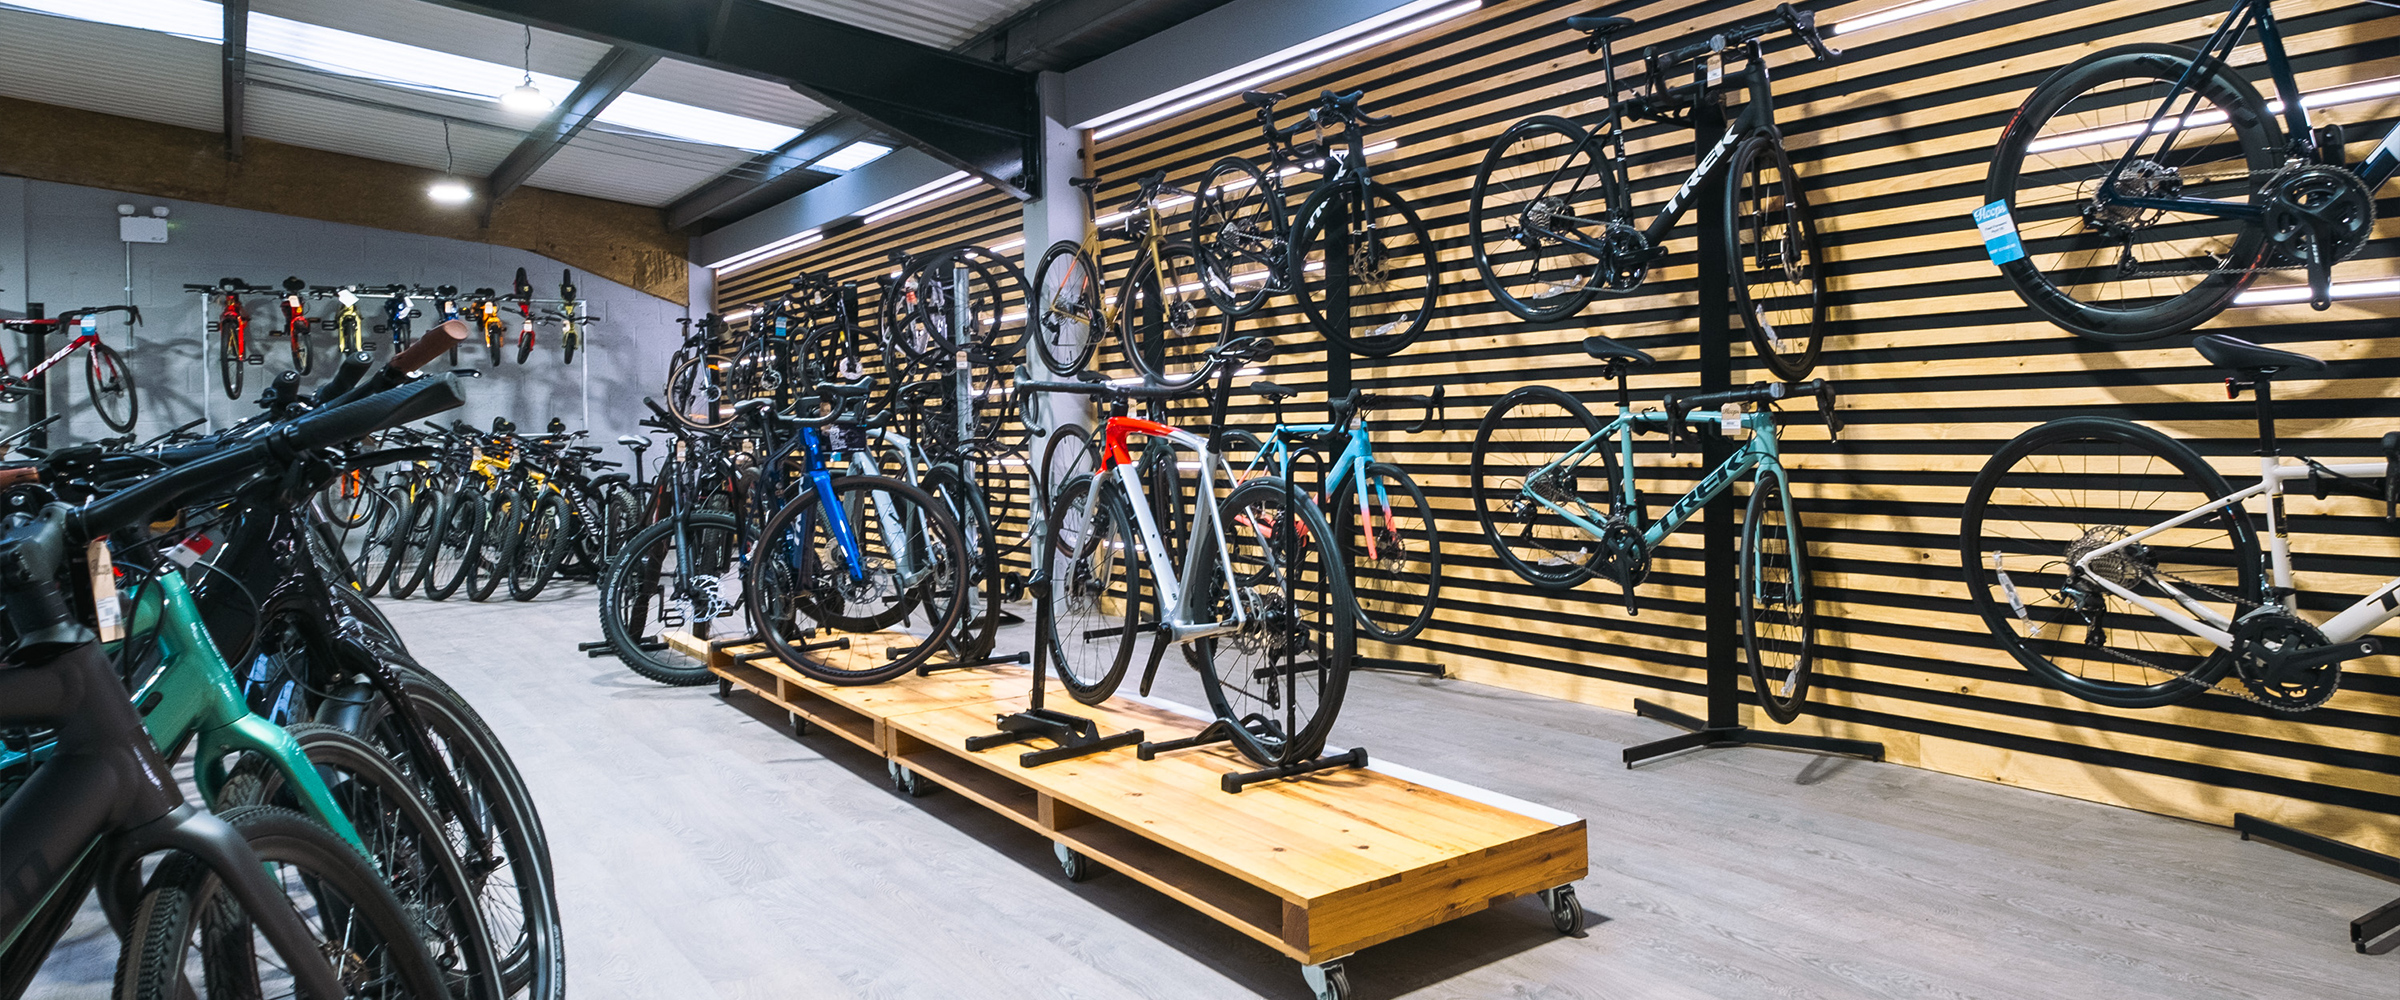 Find Your Ride: Road Bikes